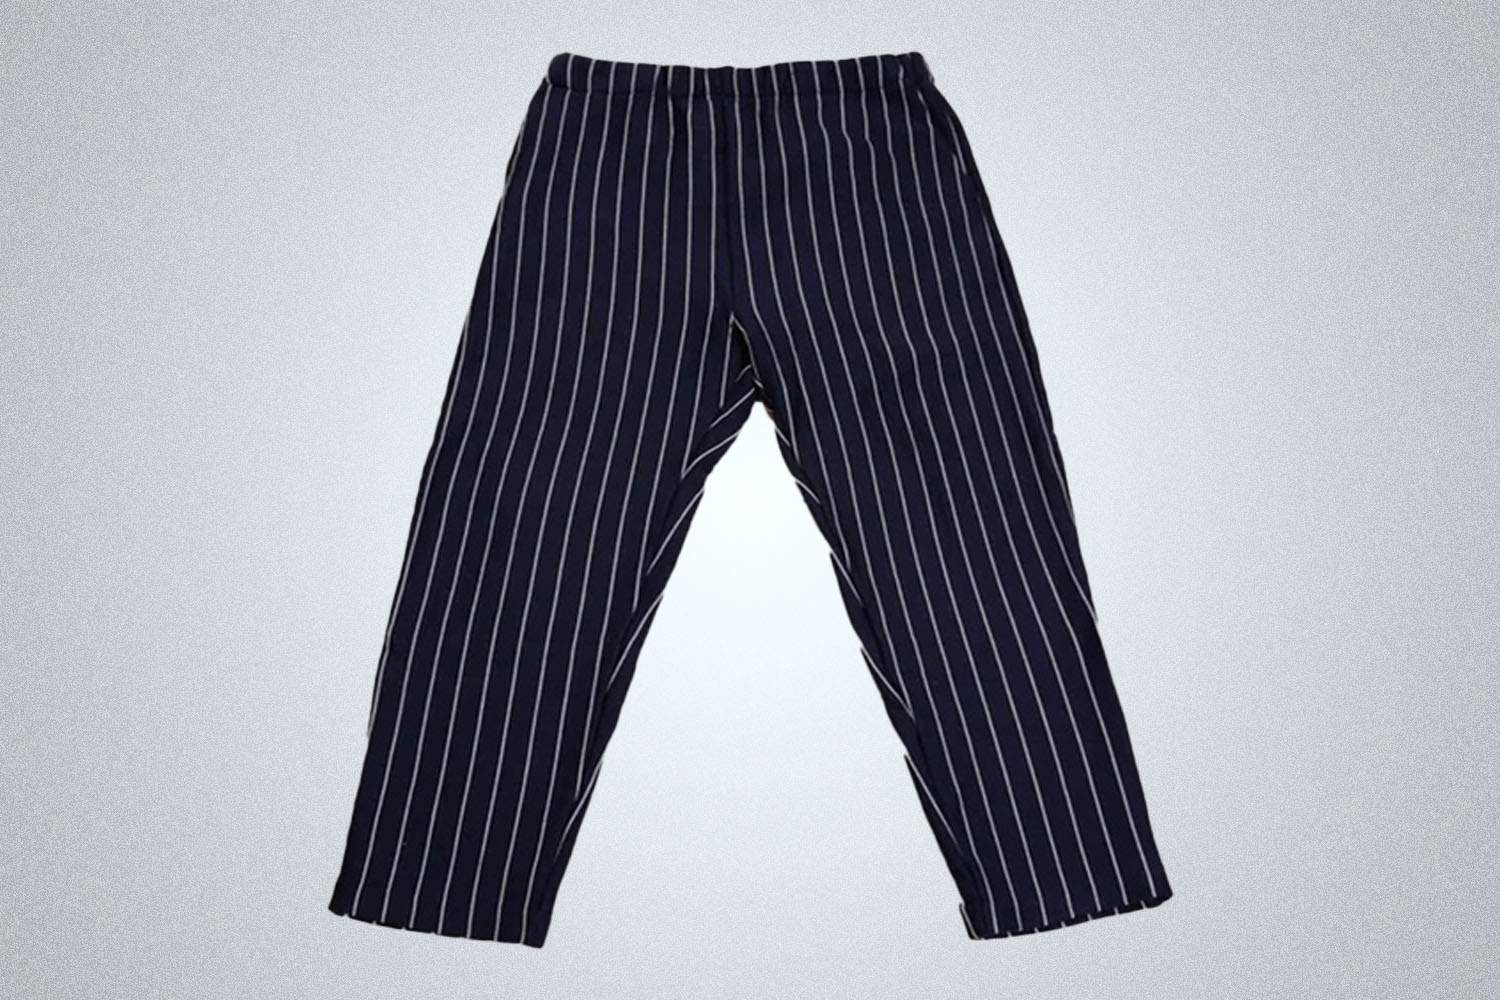 a pair of blue pinstriped pants from The Elder Statesman on a grey background